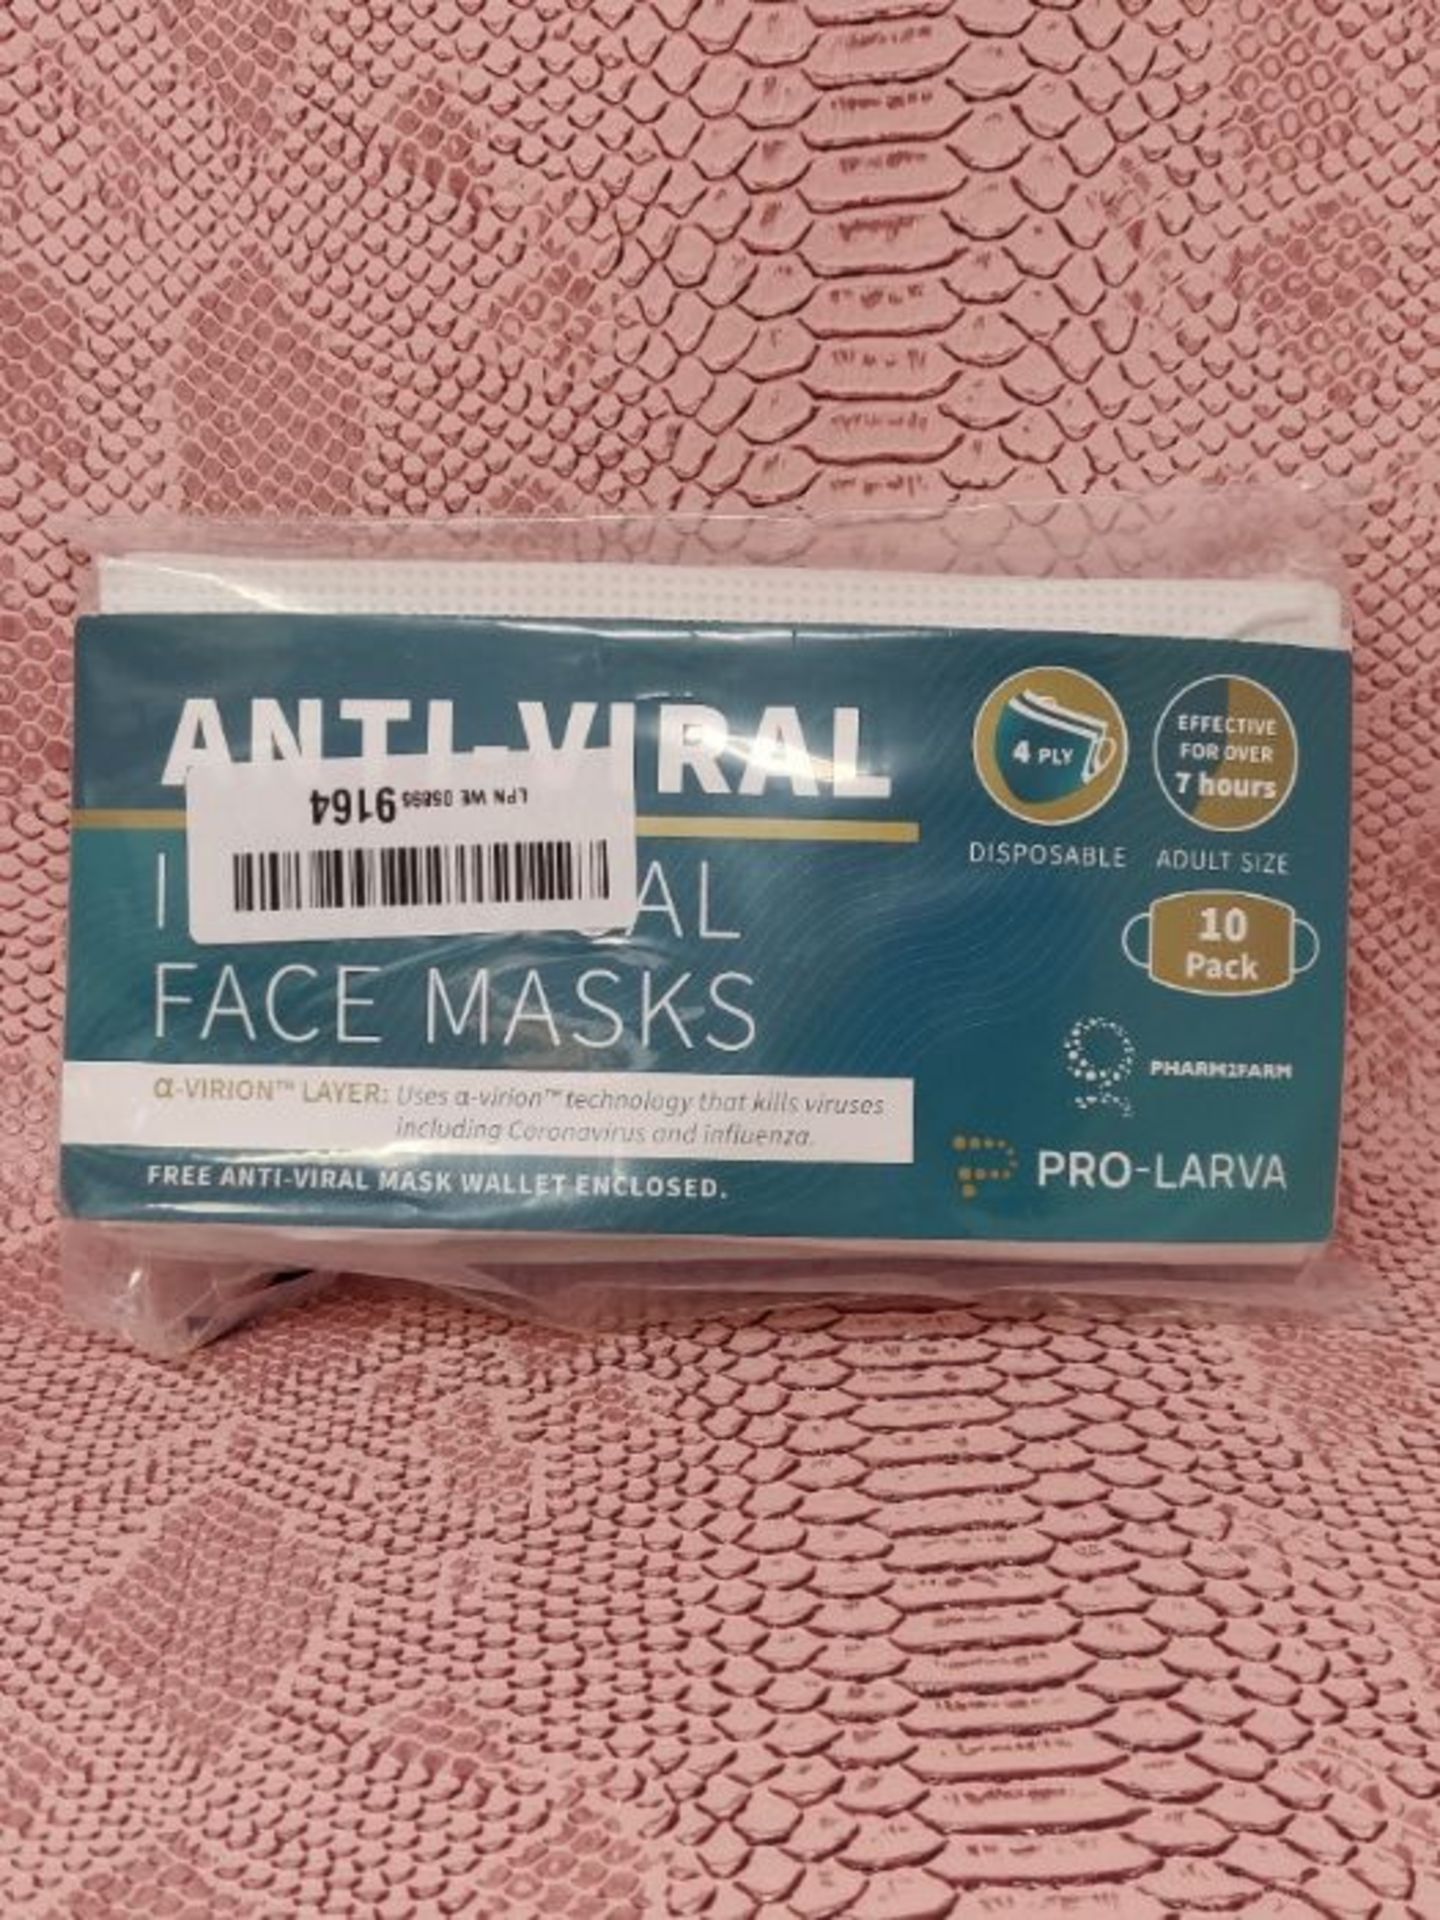 Pharm2Farm Pro-Larva Medical Grade Type IIR 4-Ply Disposable Face Mask (10 Pack) - Image 2 of 3